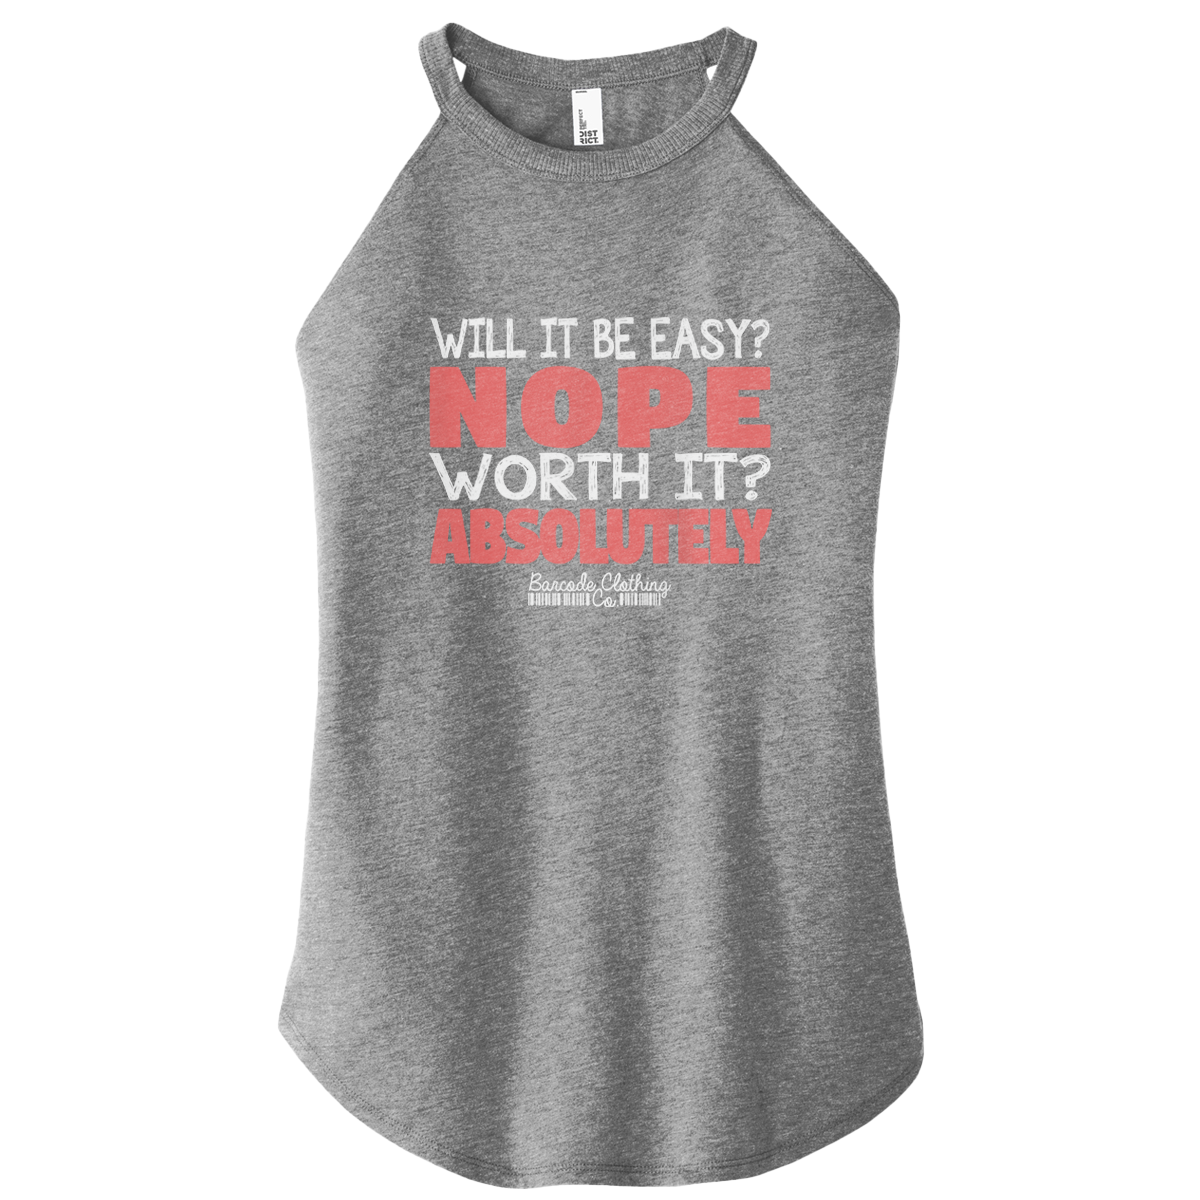 Will It Be Easy Nope Worth It Color Rocker Tank